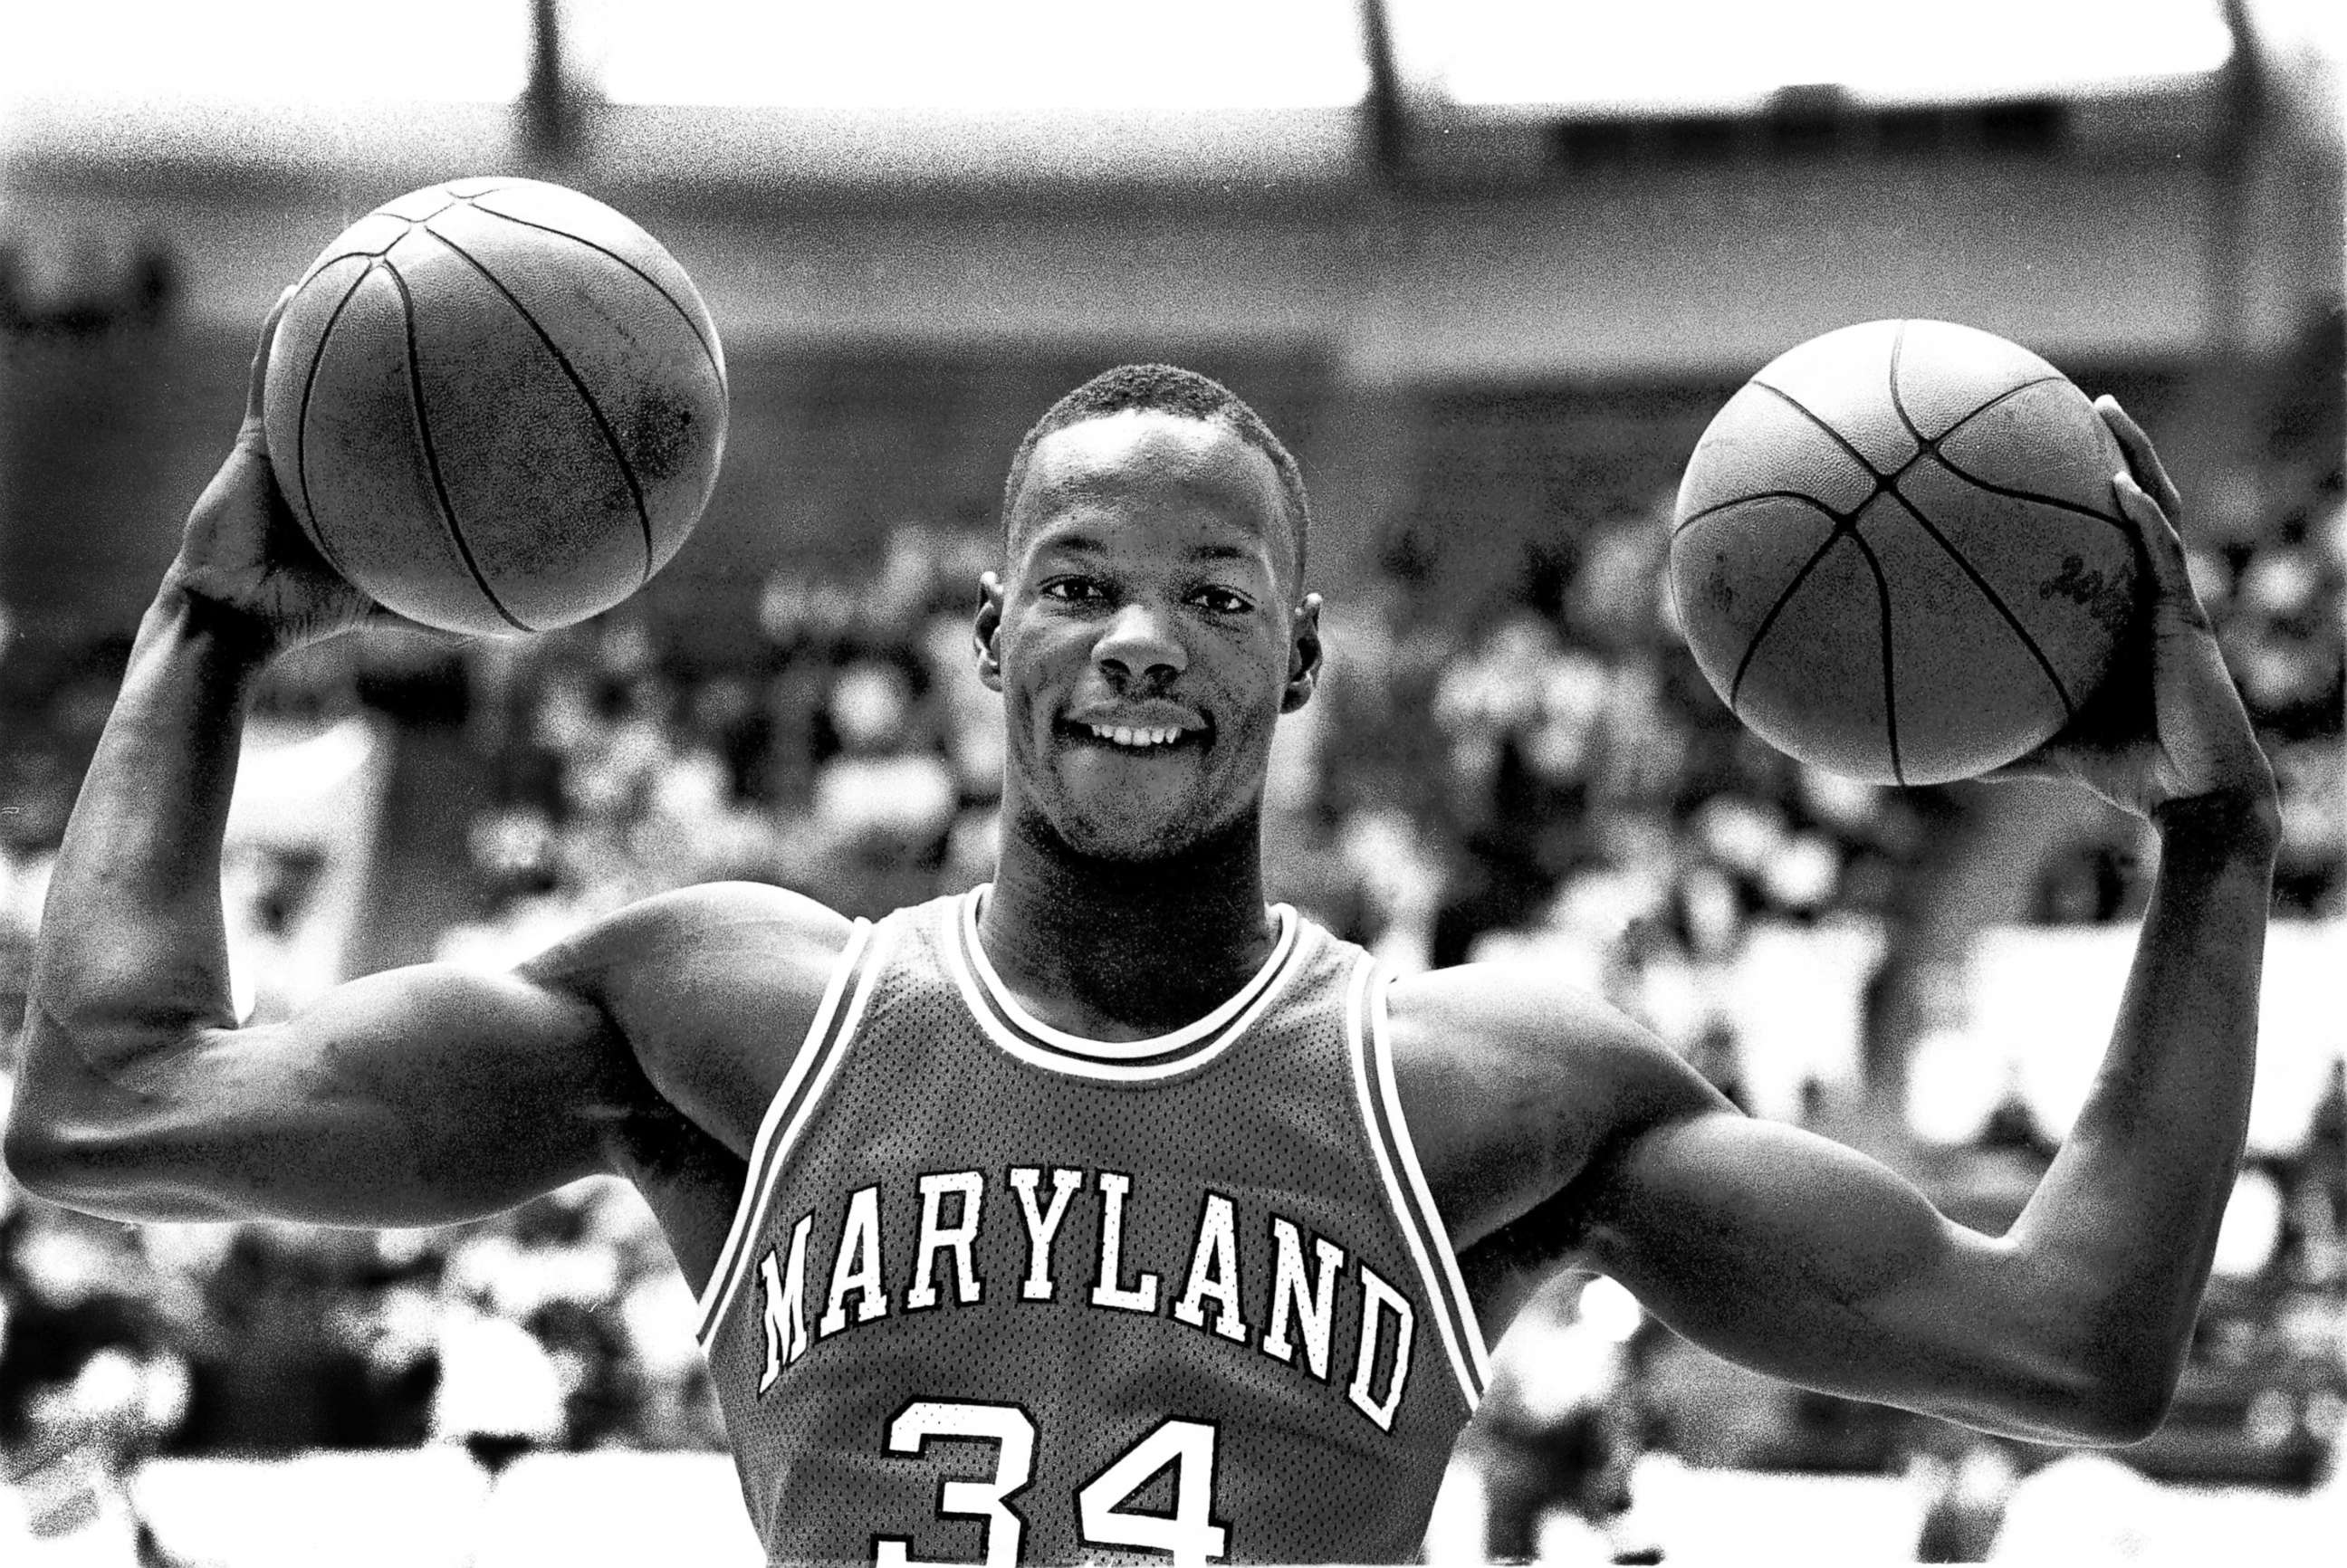 PHOTO: Maryland basketball star Len Bias poses for a photo taken at the University of Virginia in an undated photo.